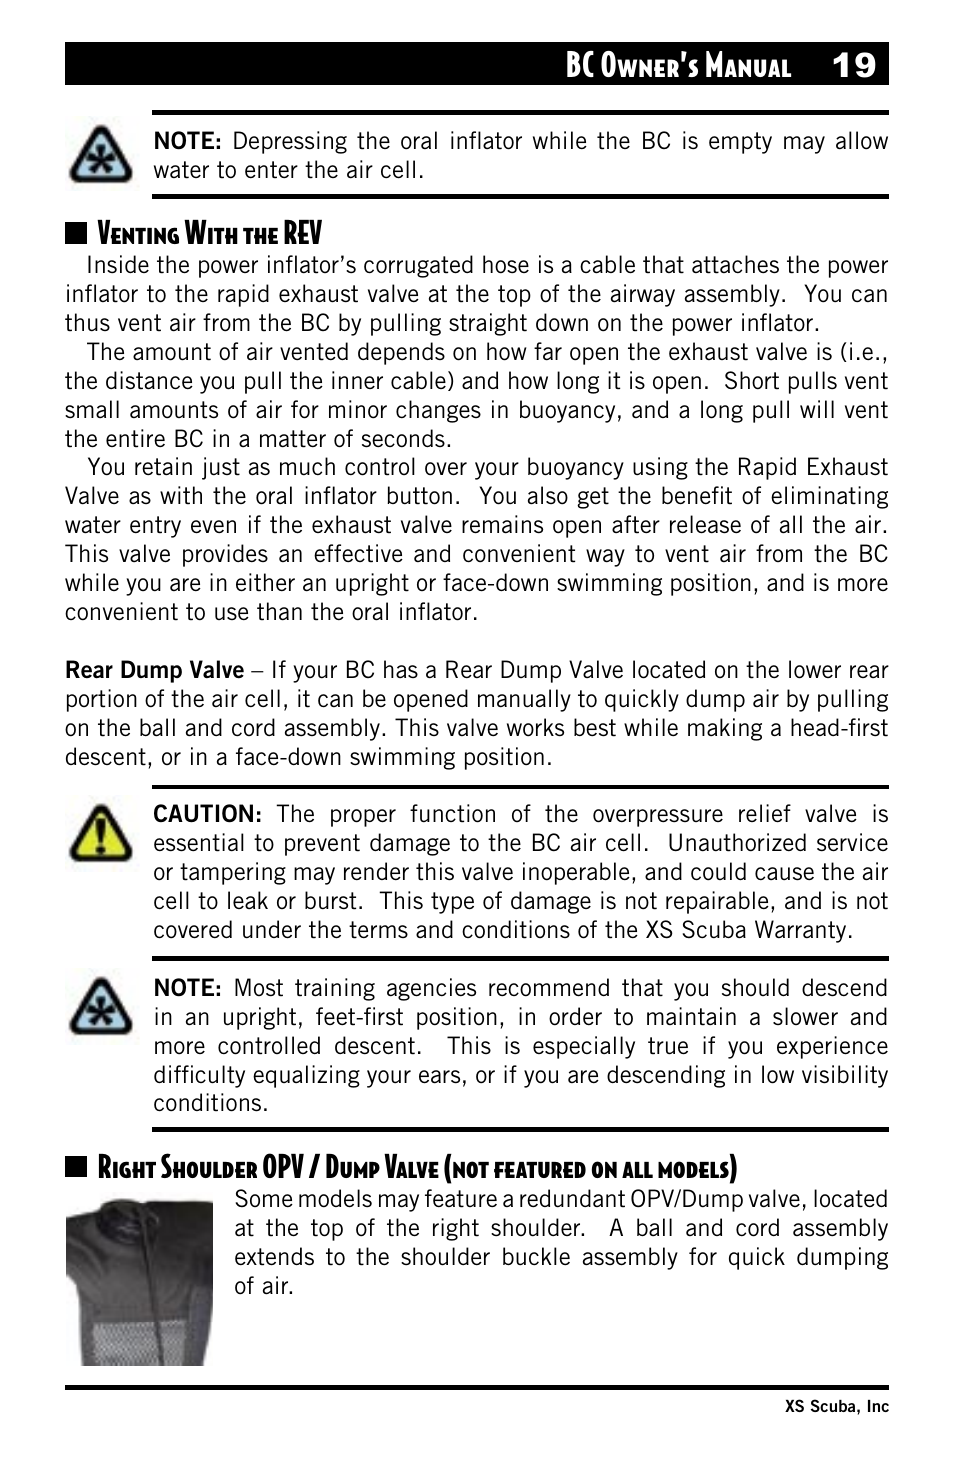 Venting with the rev, Rear dump valve, Right shoulder opv/dump valve | Bc owner’s manual 19 | XS Scuba Buoyancy Compensator User Manual | Page 19 / 24